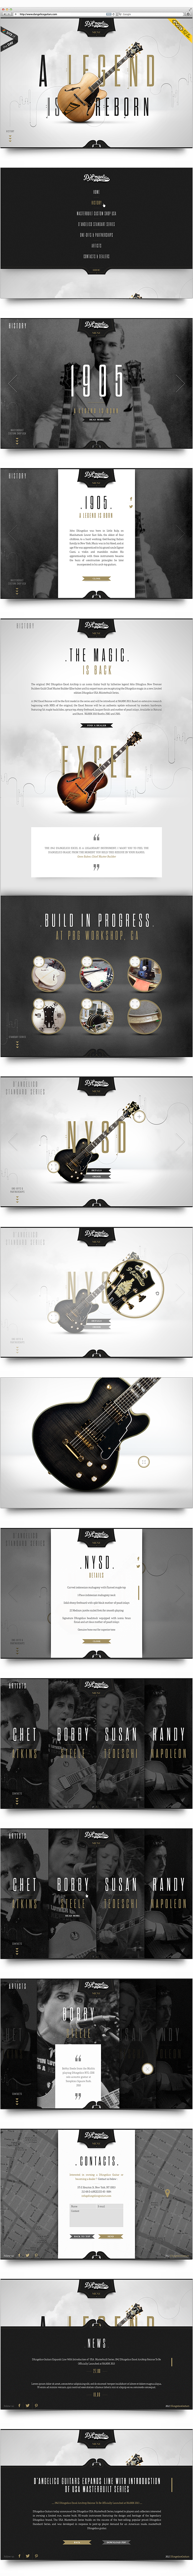 D'Angelico  GUITARS  premium luxury hand made  Music  italian Quality jazz  rock  iconic clouds paralax Scrolling html5